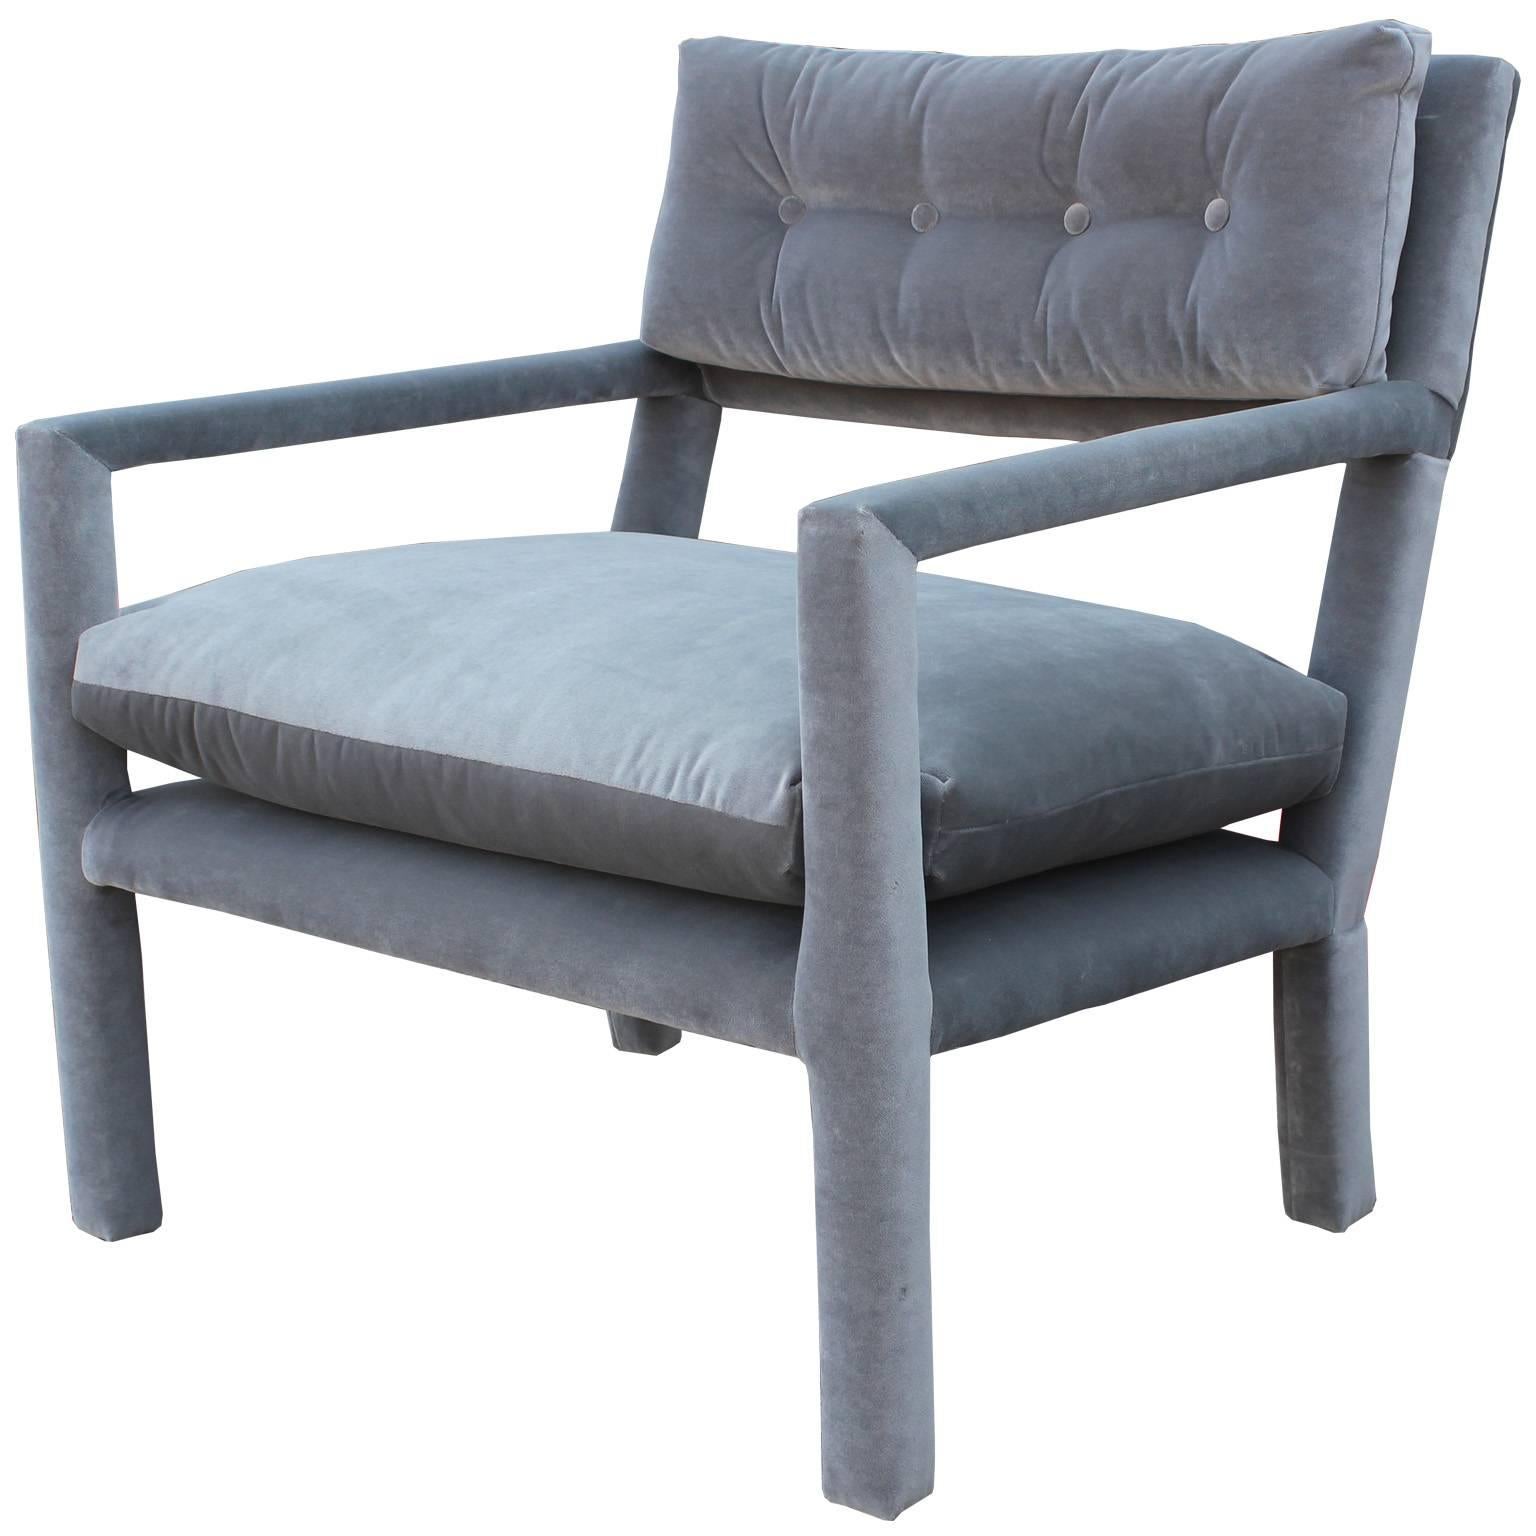 Luxe pair of Milo Baughman style Parsons lounge chairs. Chairs are freshly upholstered in a soft dove grey velvet. Chairs have excellent lines and negative space.